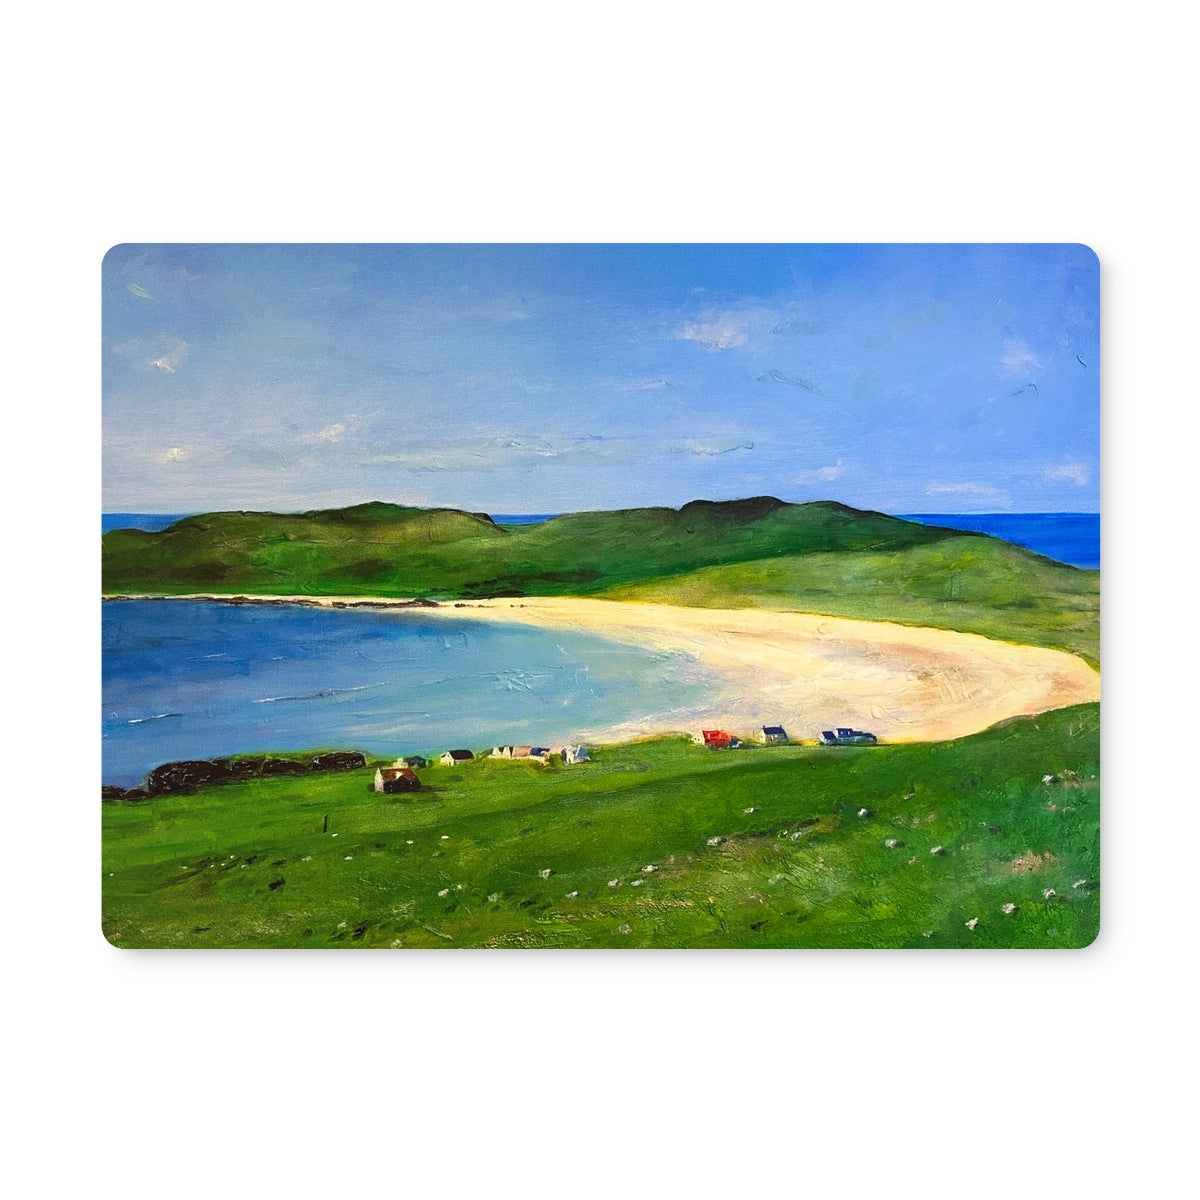 Balephuil Beach Tiree Art Gifts Placemat-Placemats-Hebridean Islands Art Gallery-6 Placemats-Paintings, Prints, Homeware, Art Gifts From Scotland By Scottish Artist Kevin Hunter